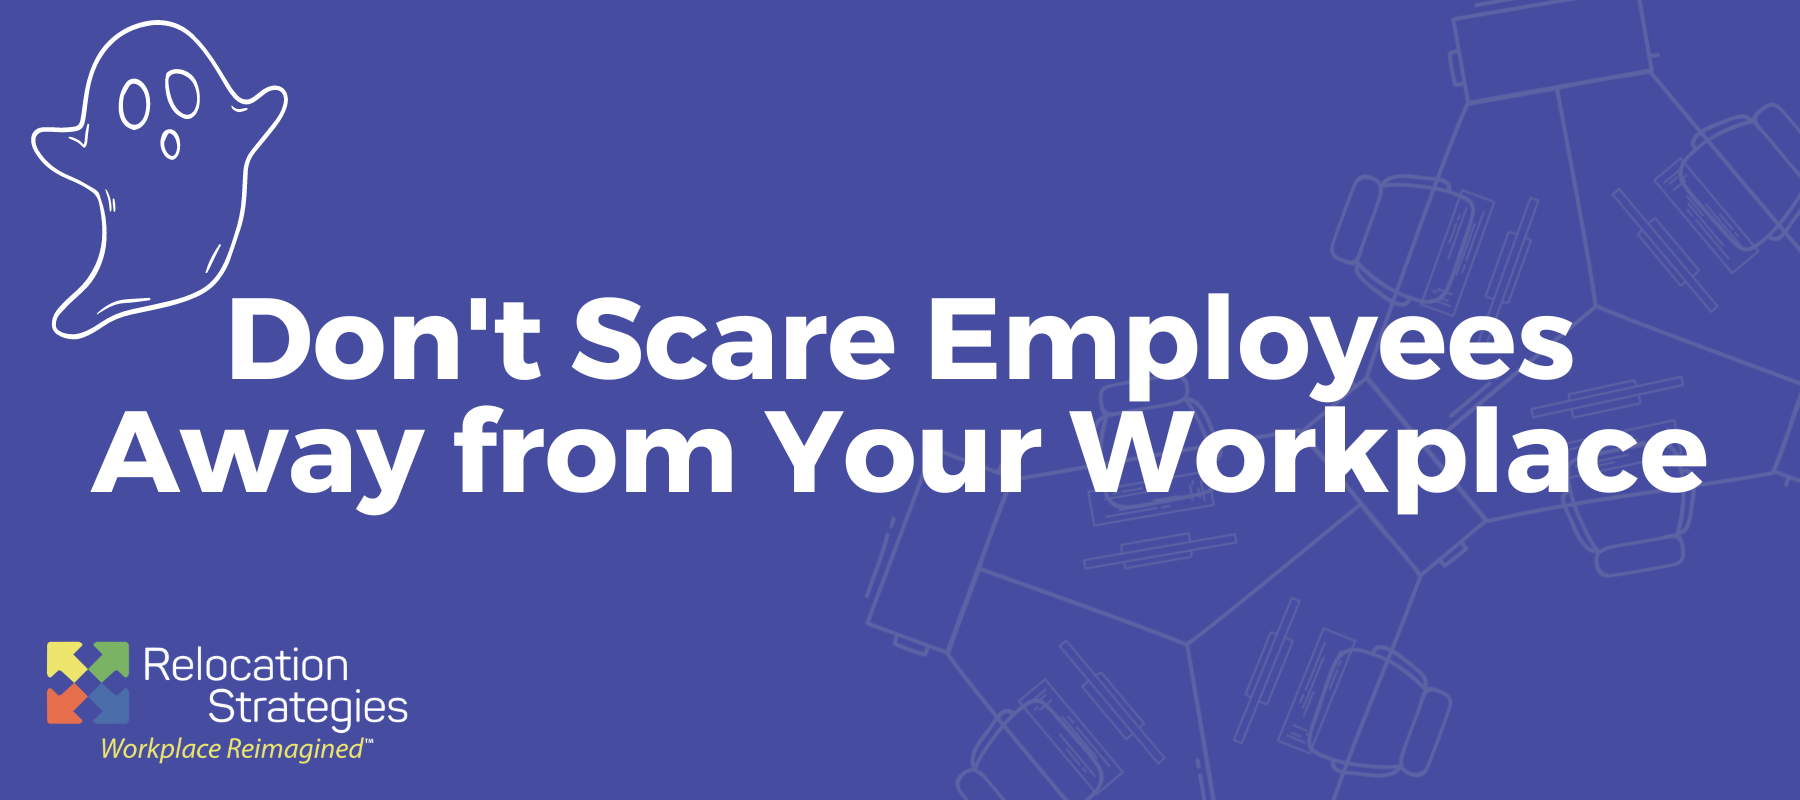 Don’t Scare Employees Away from Your Workplace!